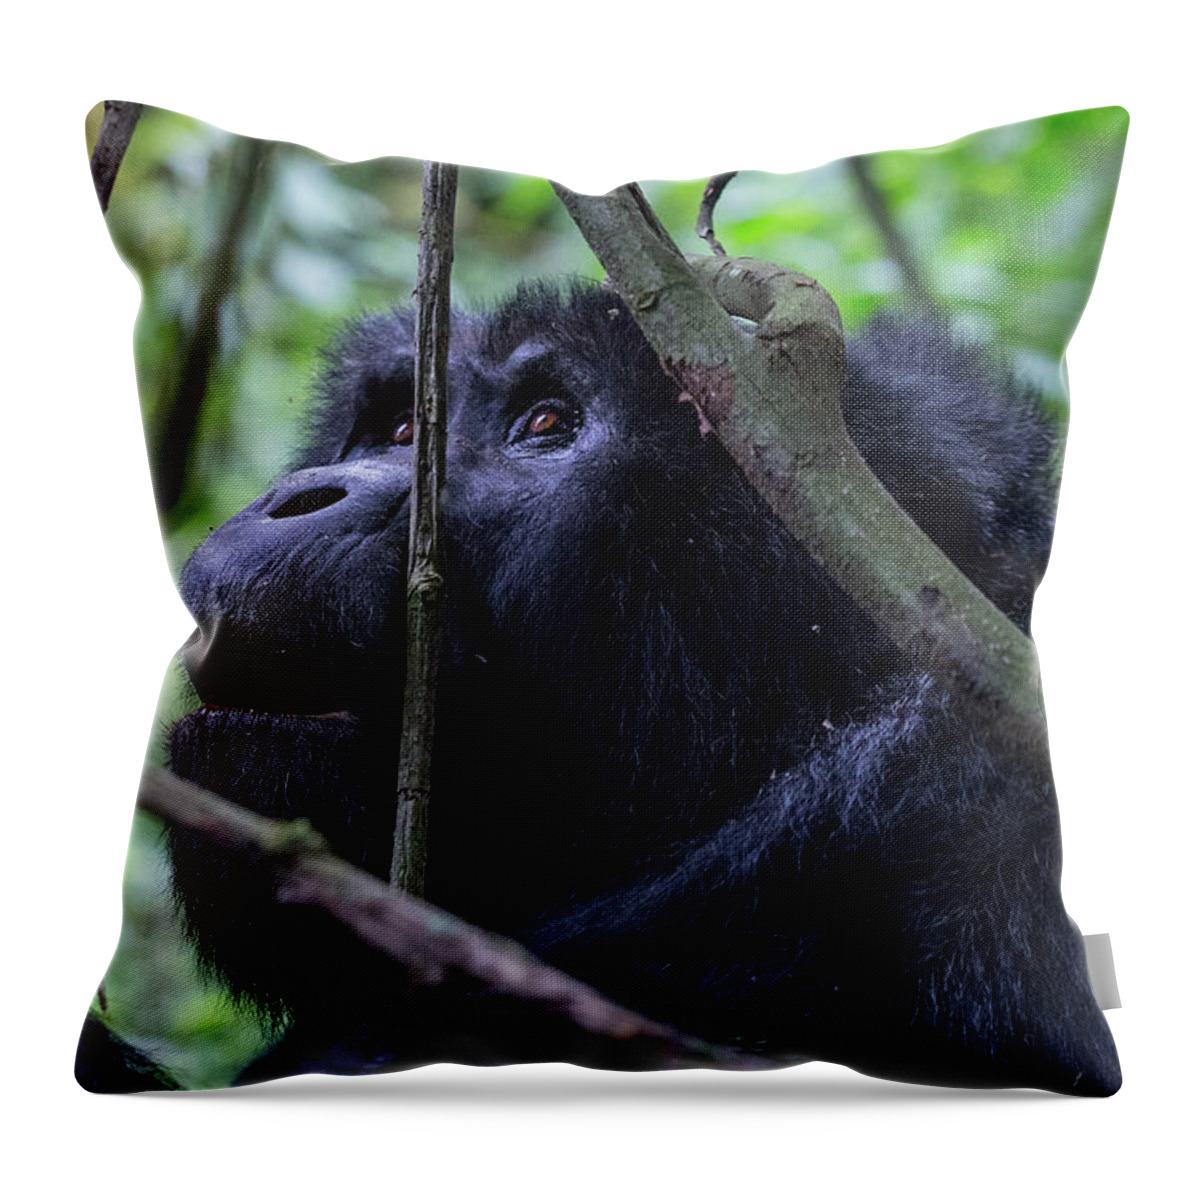 Uganda Throw Pillow featuring the photograph The Wonder by Peter Kennett